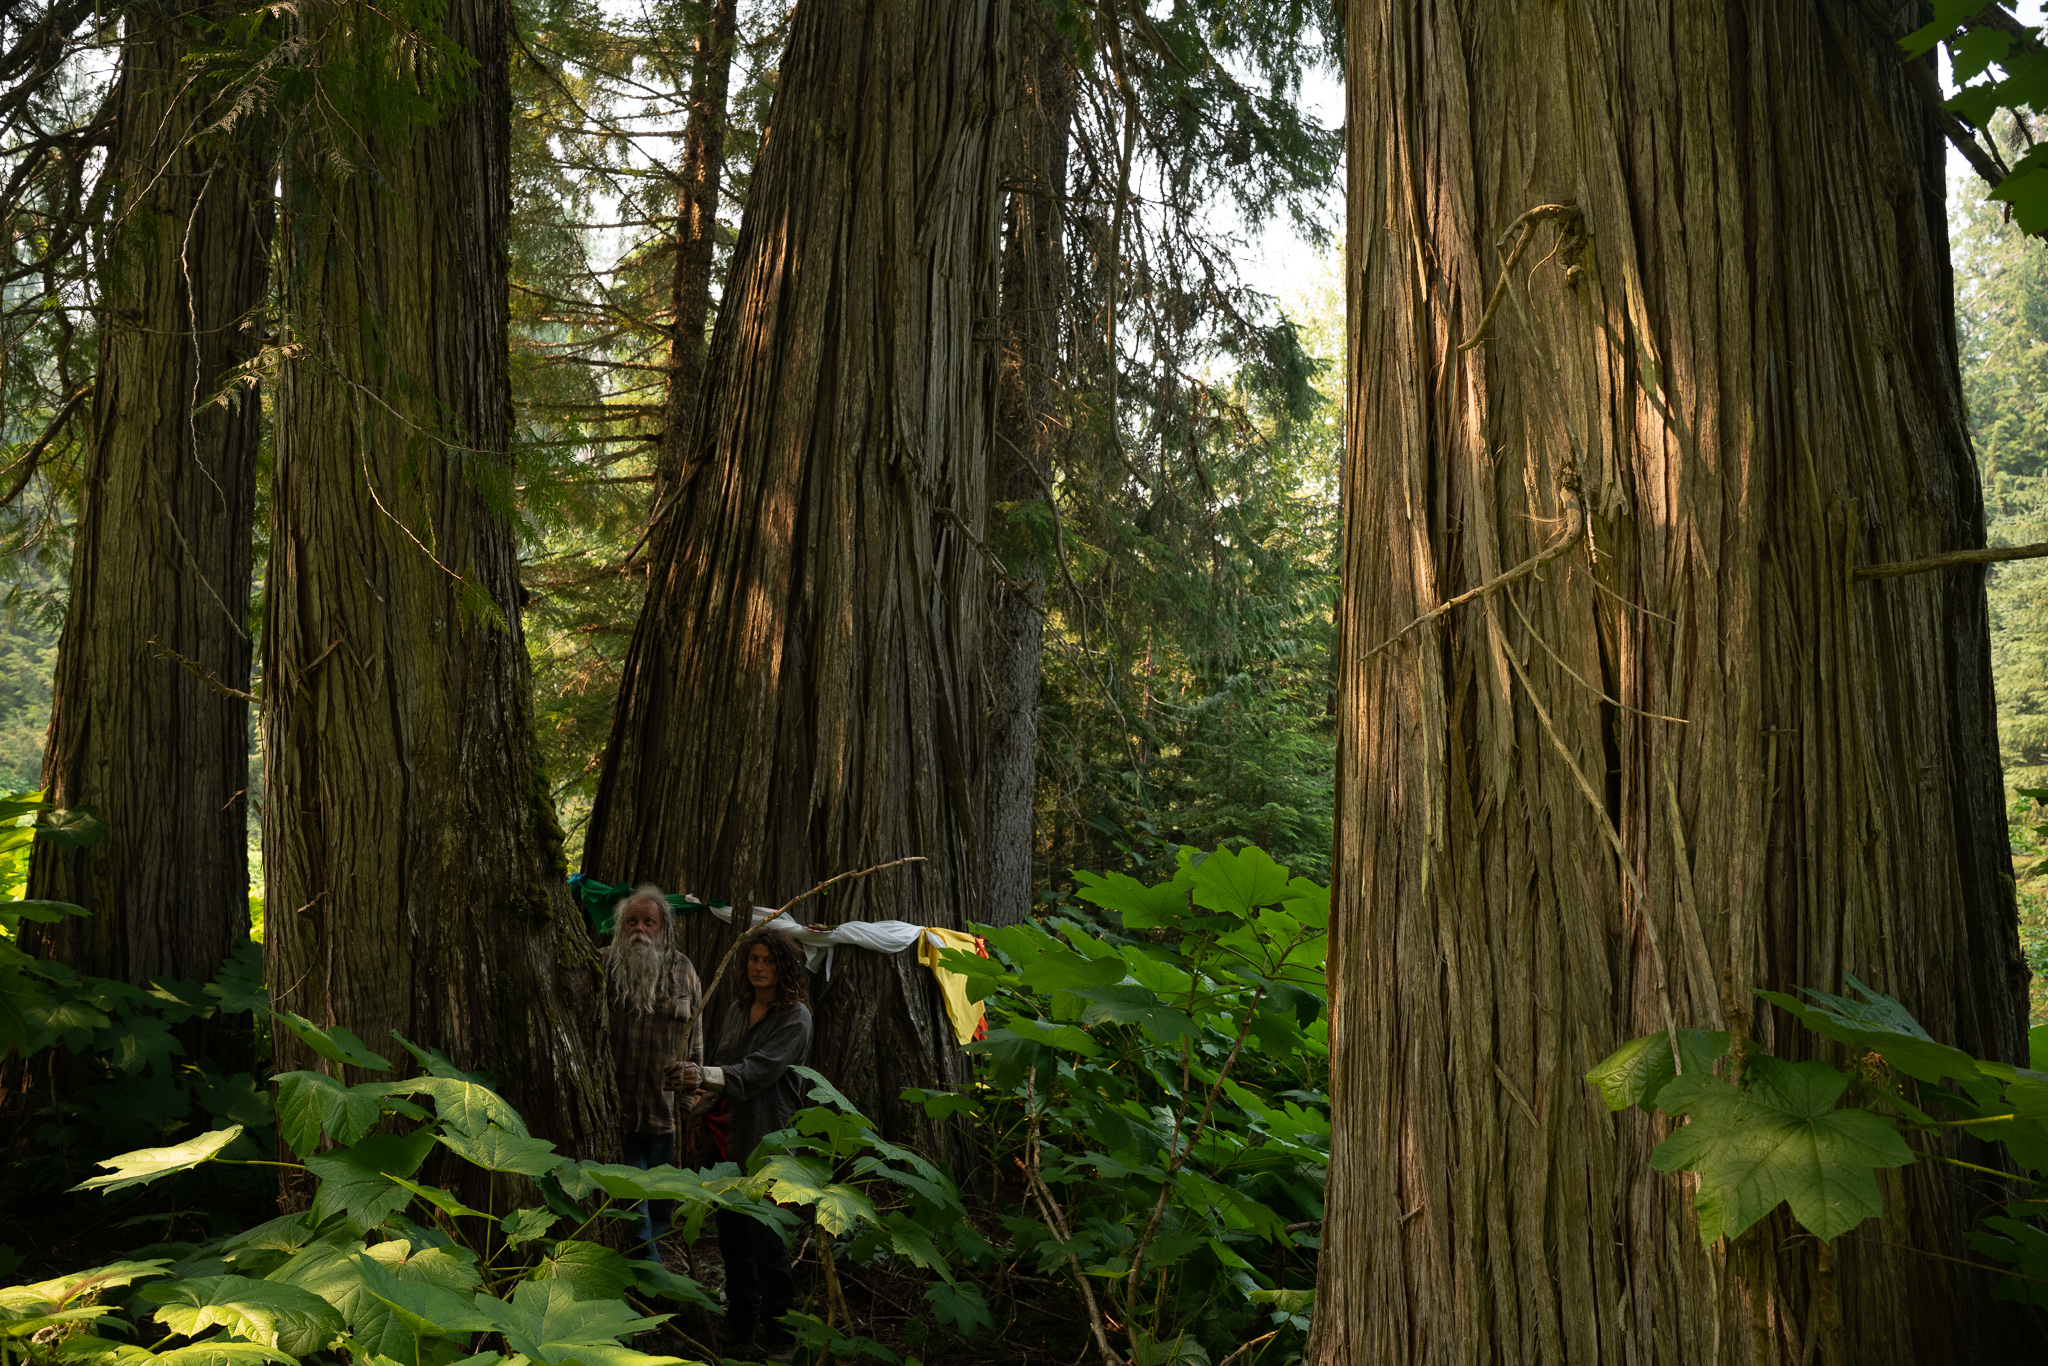 Tree blessed with ceremonial flags during the ceremony on July 11 (Photo:Old Growth Revylution)